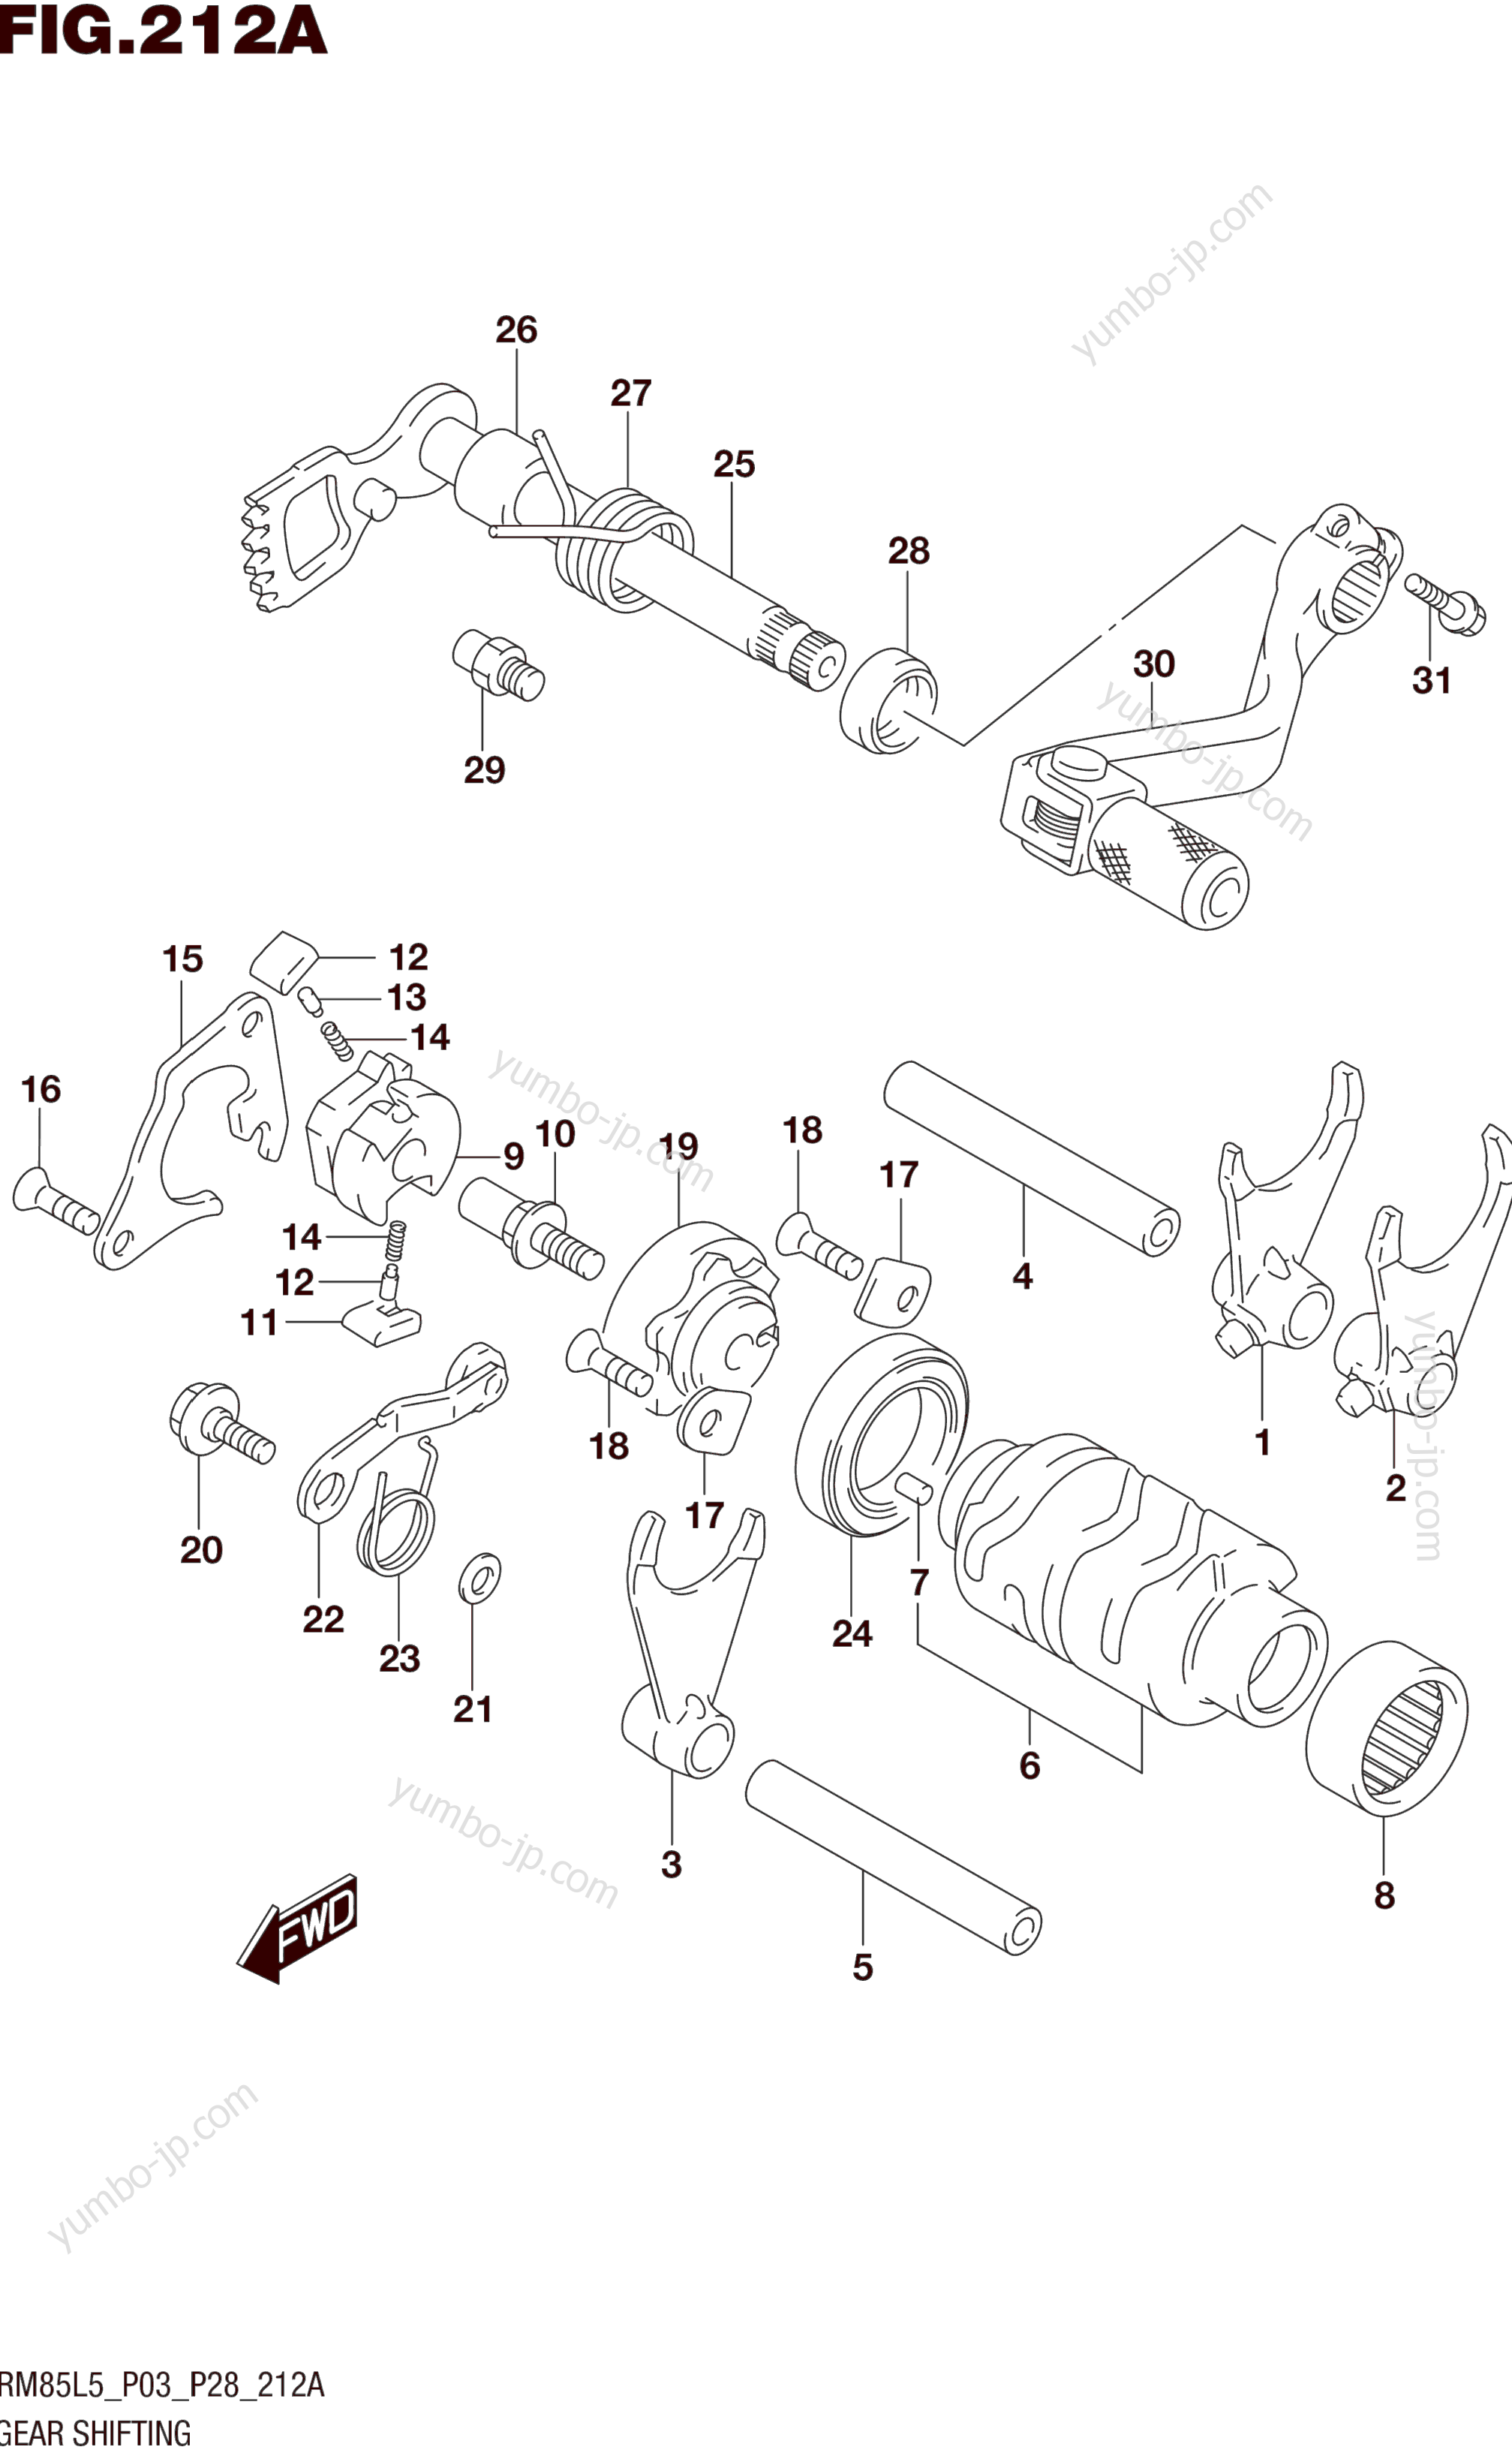 GEAR SHIFTING for motorcycles SUZUKI RM85L 2015 year